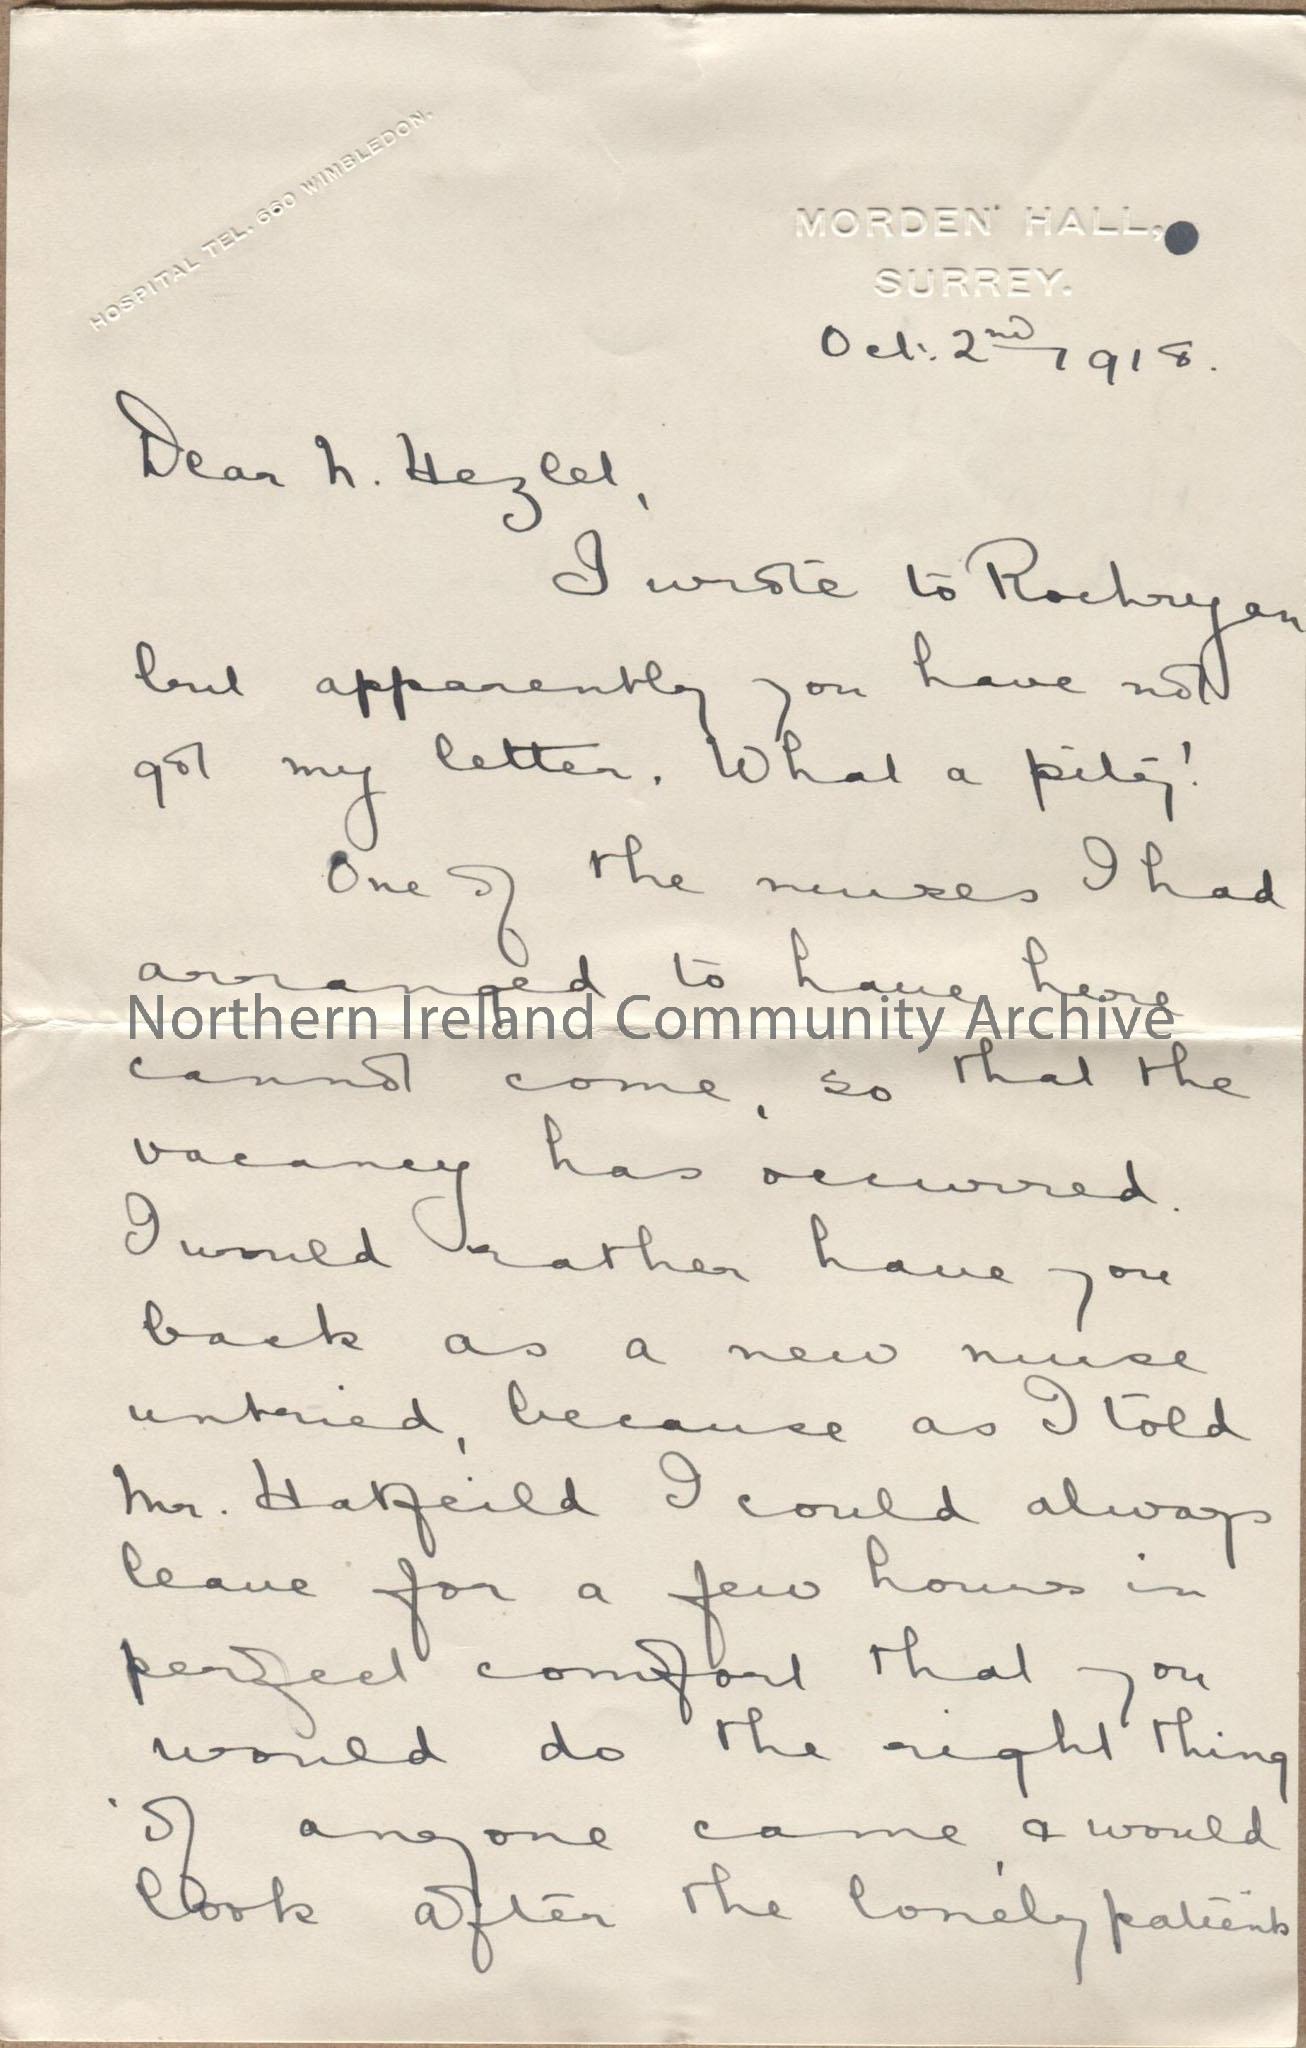 Letter to N. Hezlet from Morden Hall, Surrey. Letter mentions – writing to Rock Ryan but the letter not being received, about having a nursing vacancy…